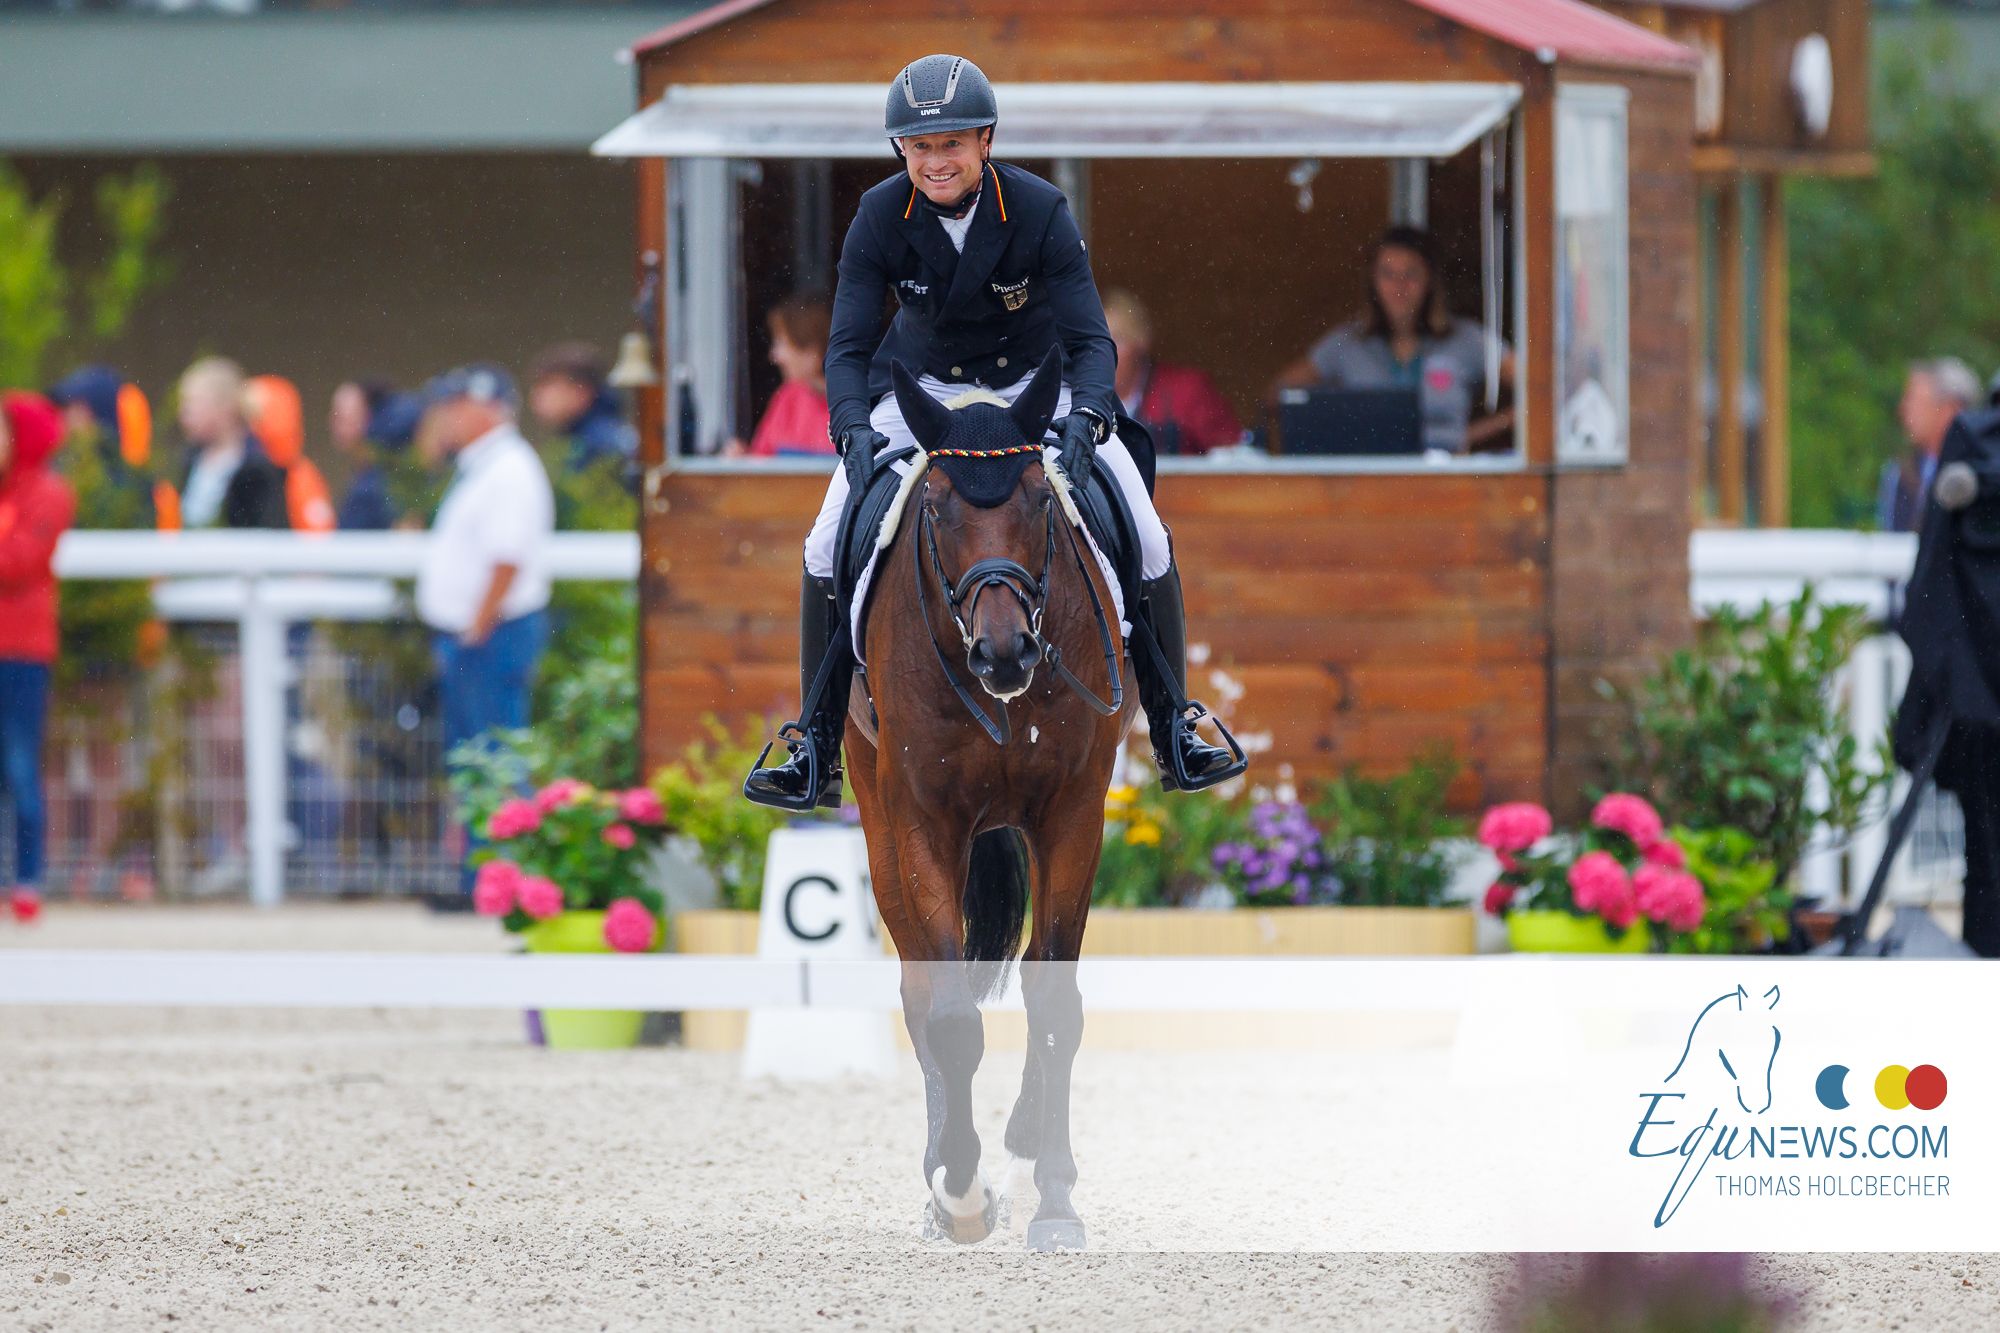 European Championship Eventing: Great Britain in the lead, Michael Jung leads individual